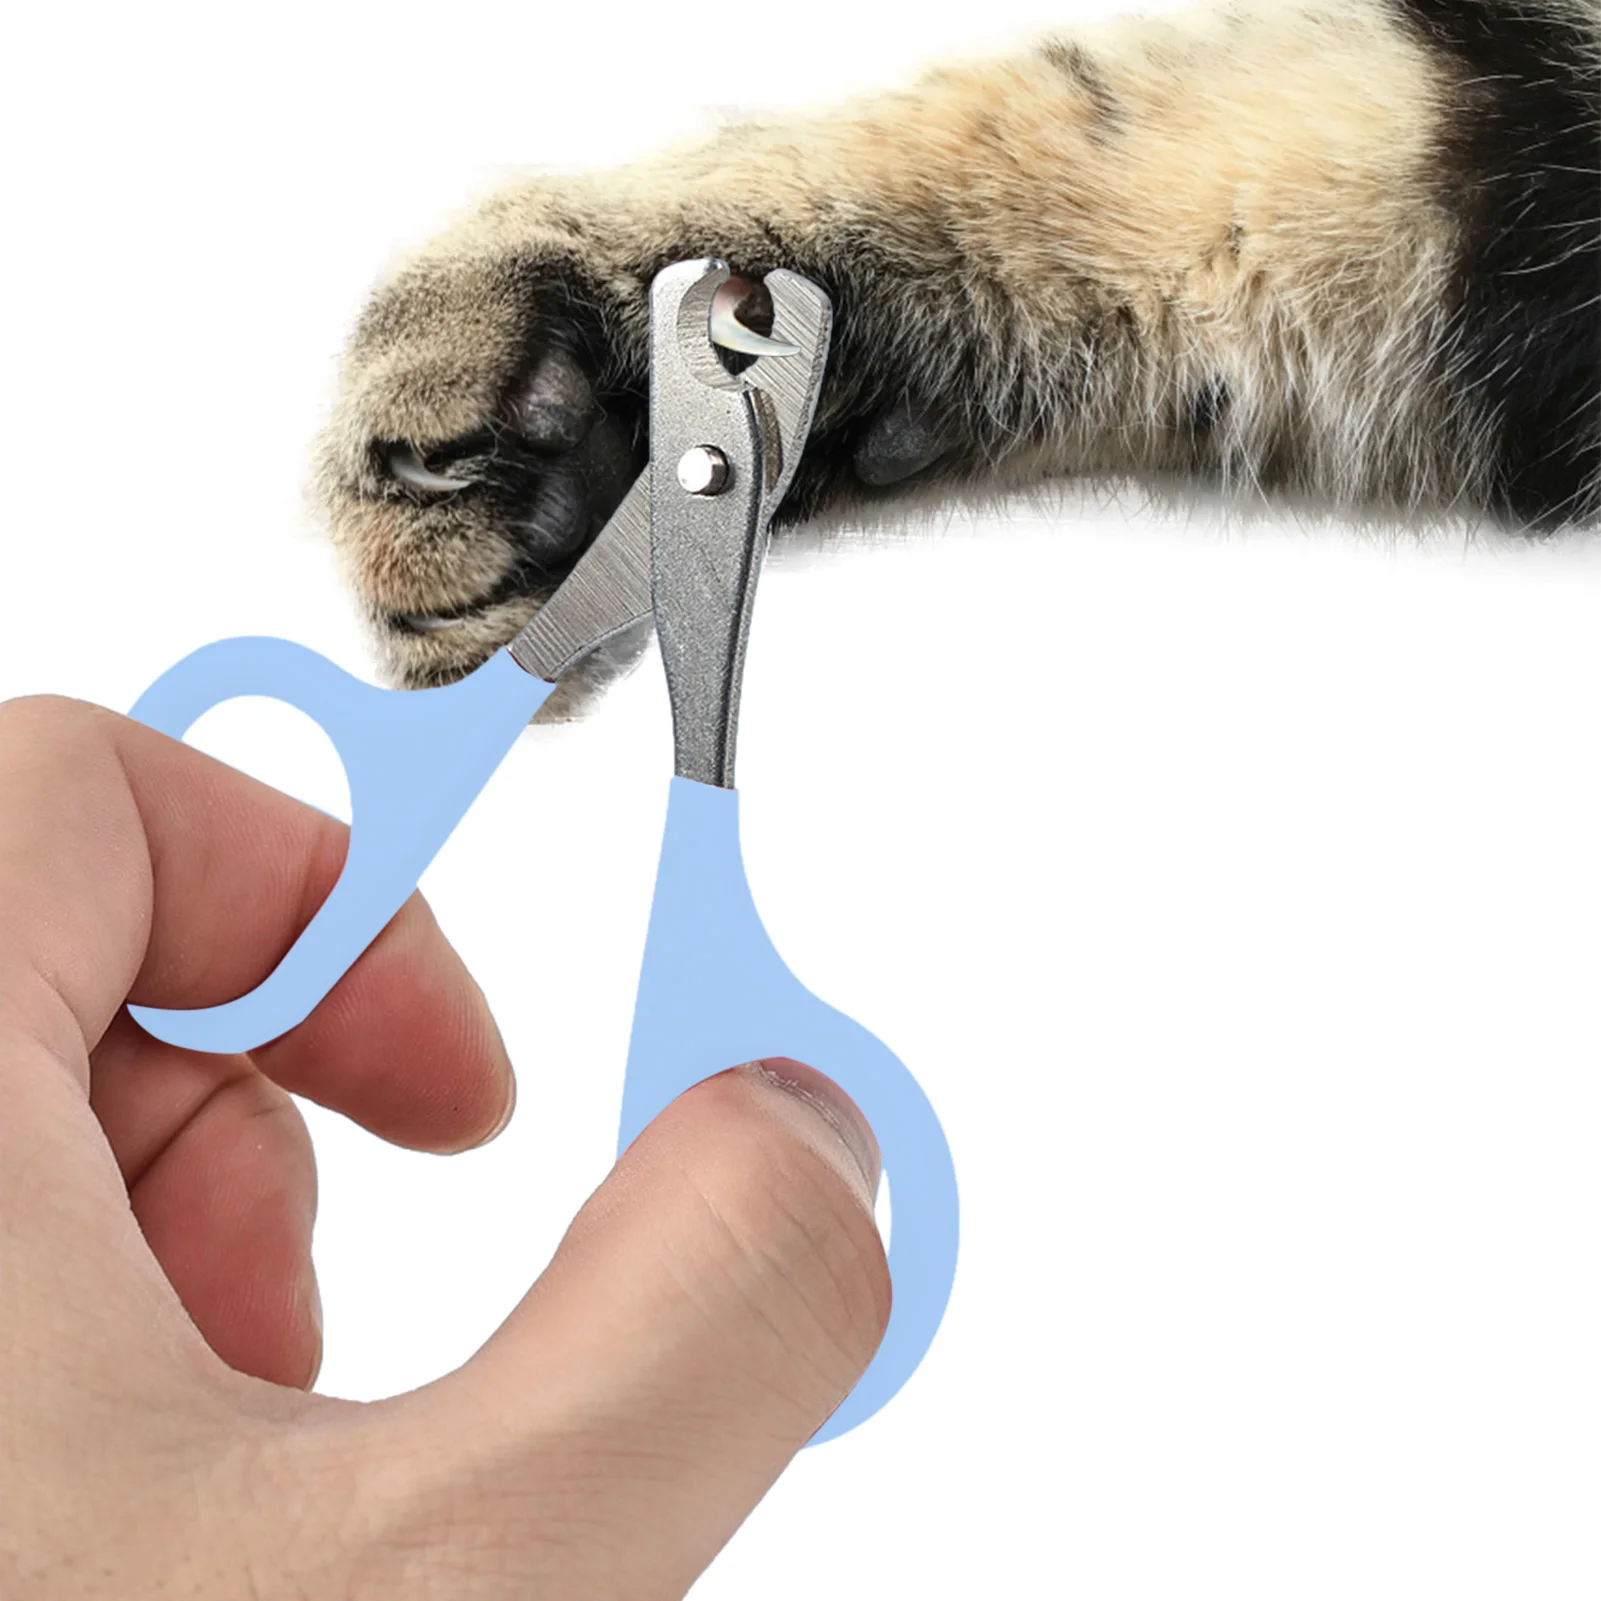 

Nail Clippers For Small Animals Stainless Steel Cat Claw Trimmer Grooming Kit Suits Most Small Animals Dogs Cats Puppies Kittens